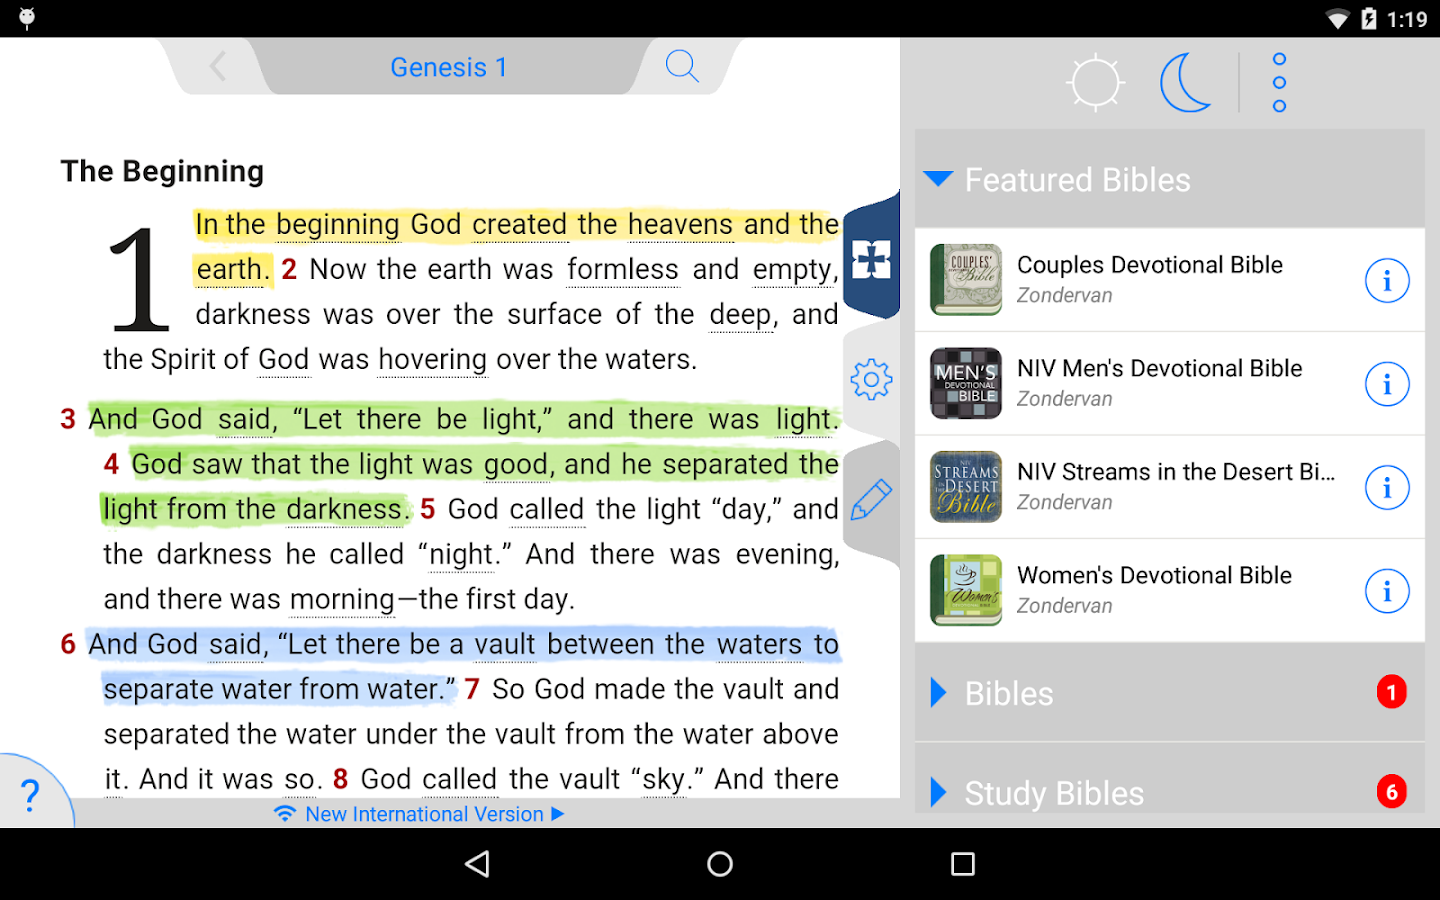 NIV 50th Anniversary Bible 7.8 Android APK Free Download 